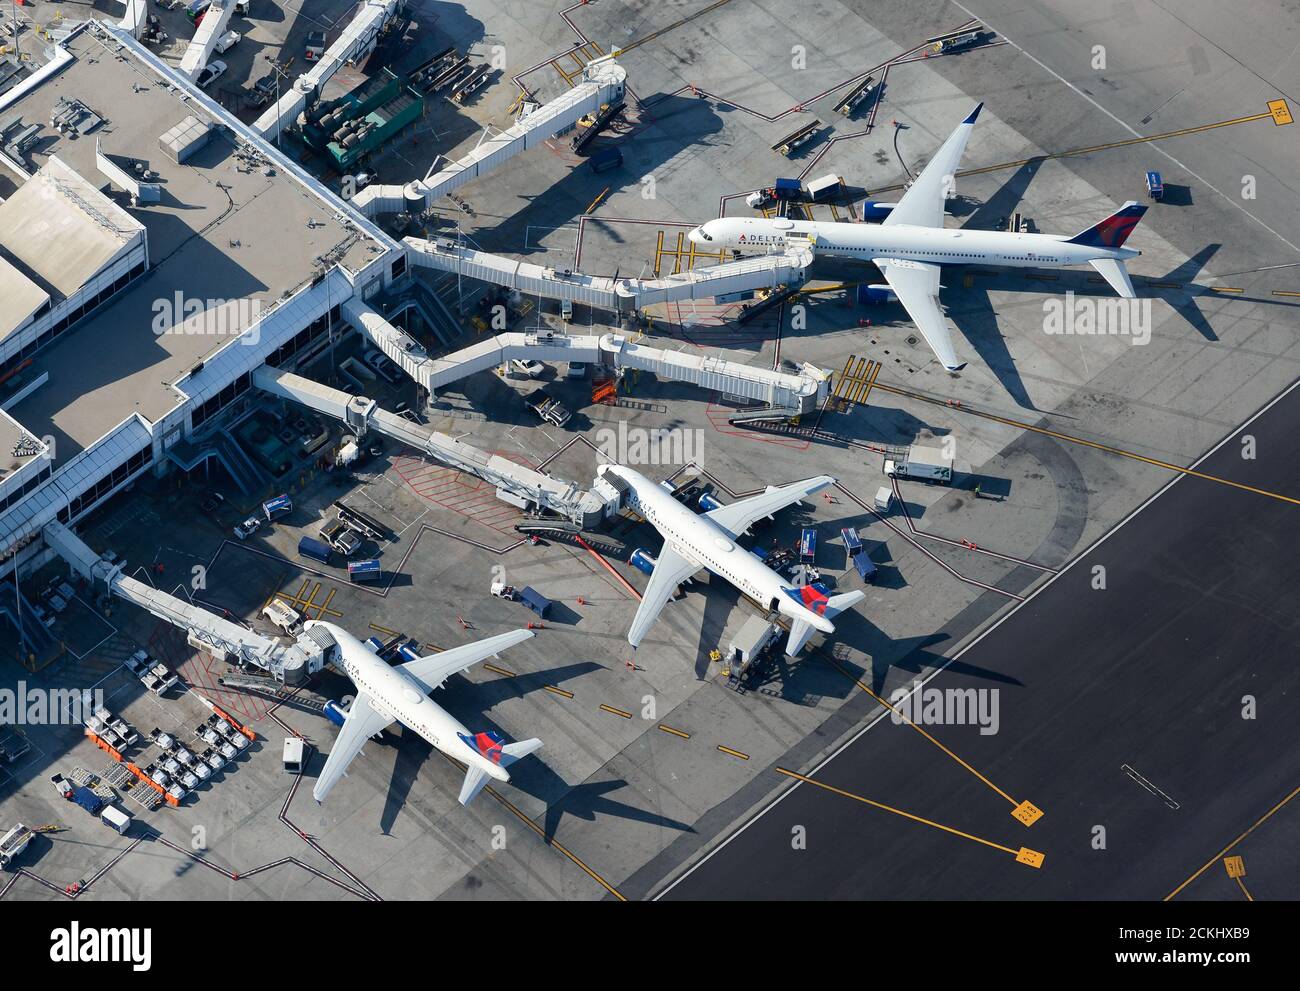 Los Angeles International Airport Terminal 2 used by Delta Airlines aerial view. LAX Airport. Delta Airlines aircraft parked. Stock Photo